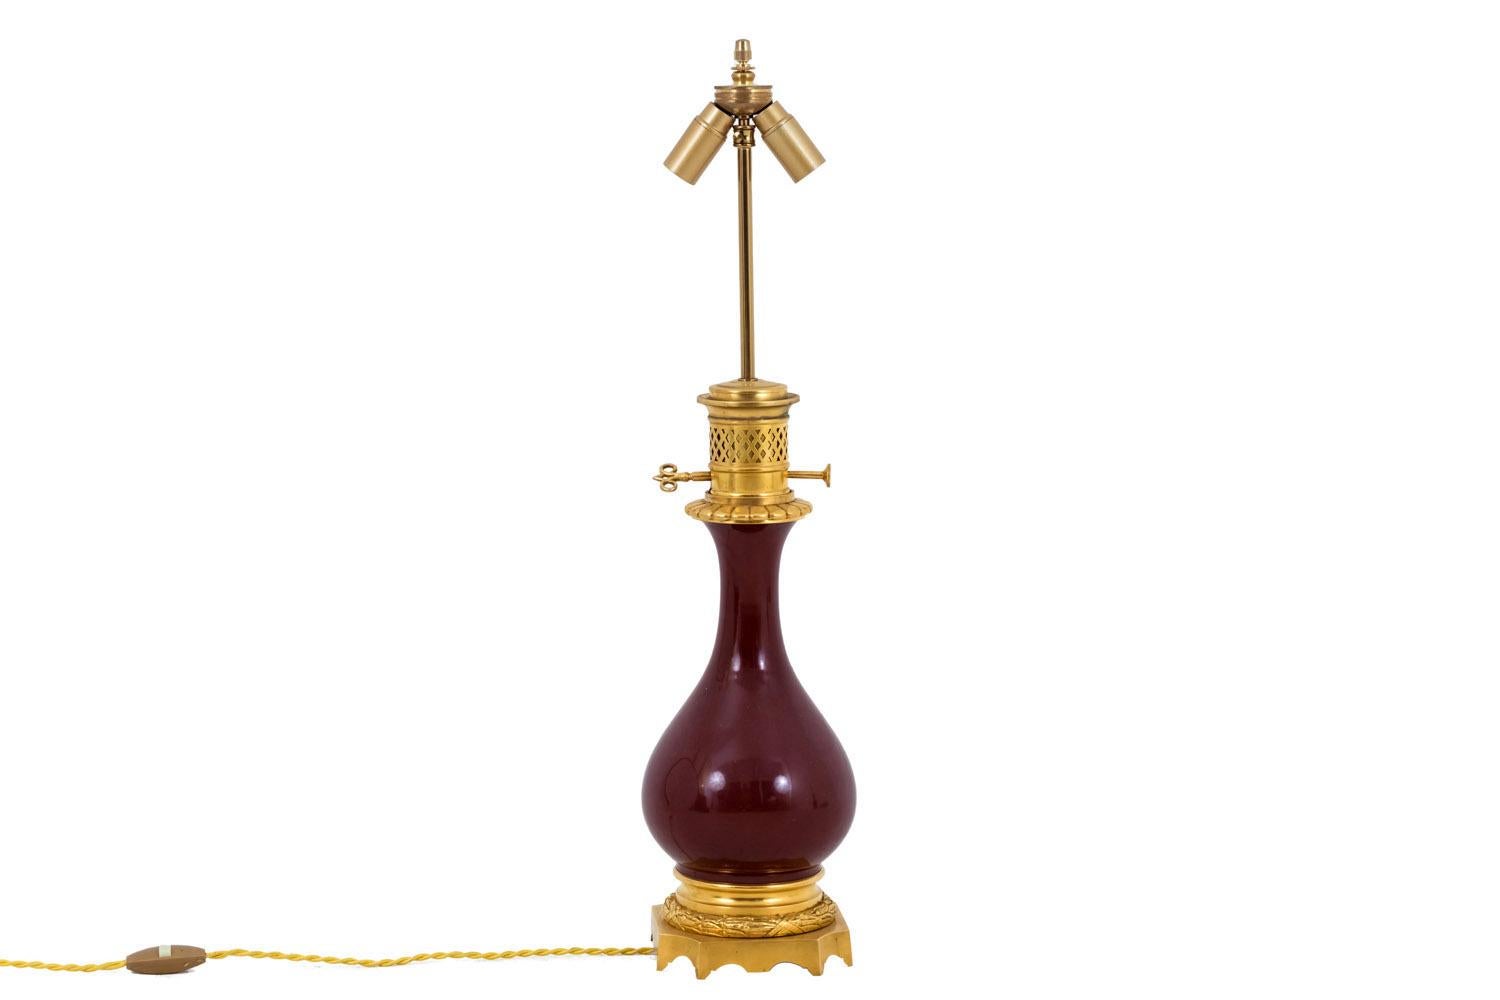 Pair of baluster shape red “sang-de-bœuf” (oxblood) porcelain lamps.
Chiselled and gilt bronze mount. High part with openwork motifs of grid and a gadroons frieze. Square shape base with eight legs and scalloped edges, topped by a ribboned laurel